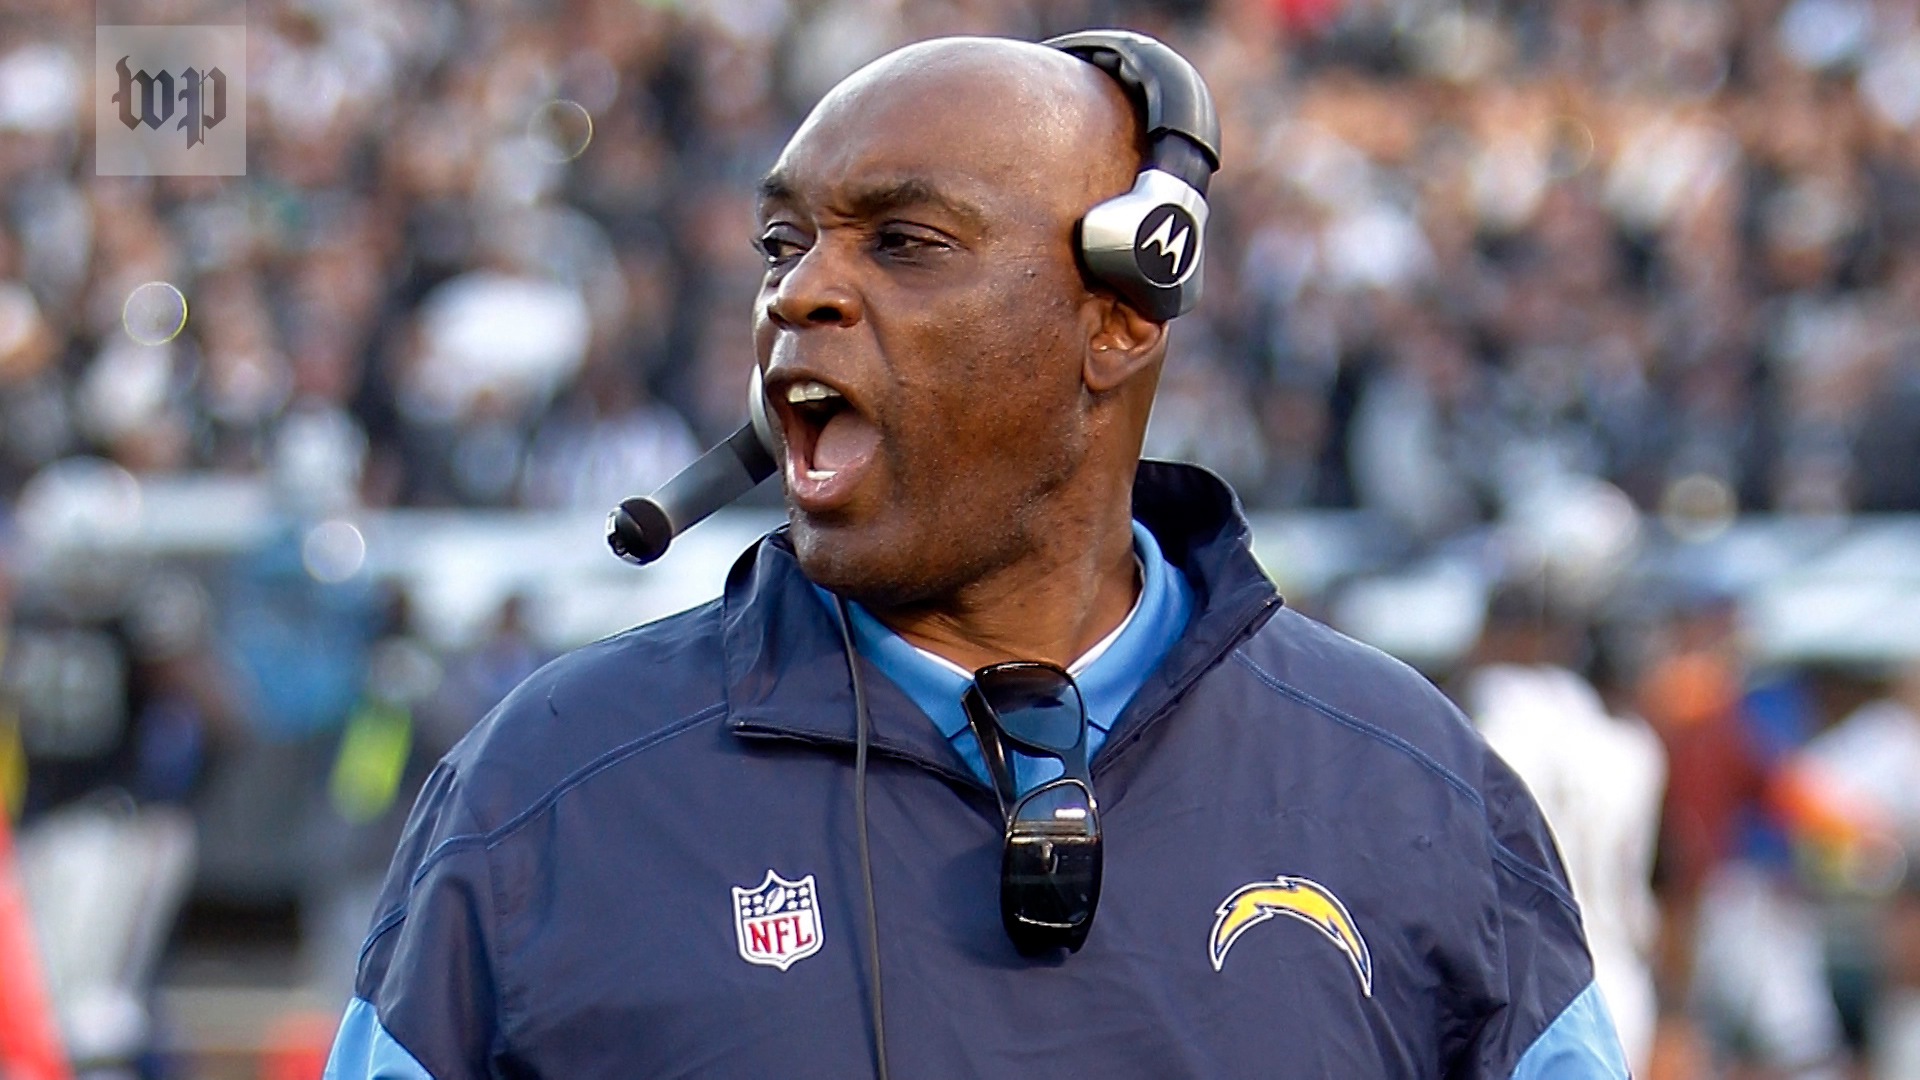 This is an image of the head coach of the NFL team The San Diego Chargers.